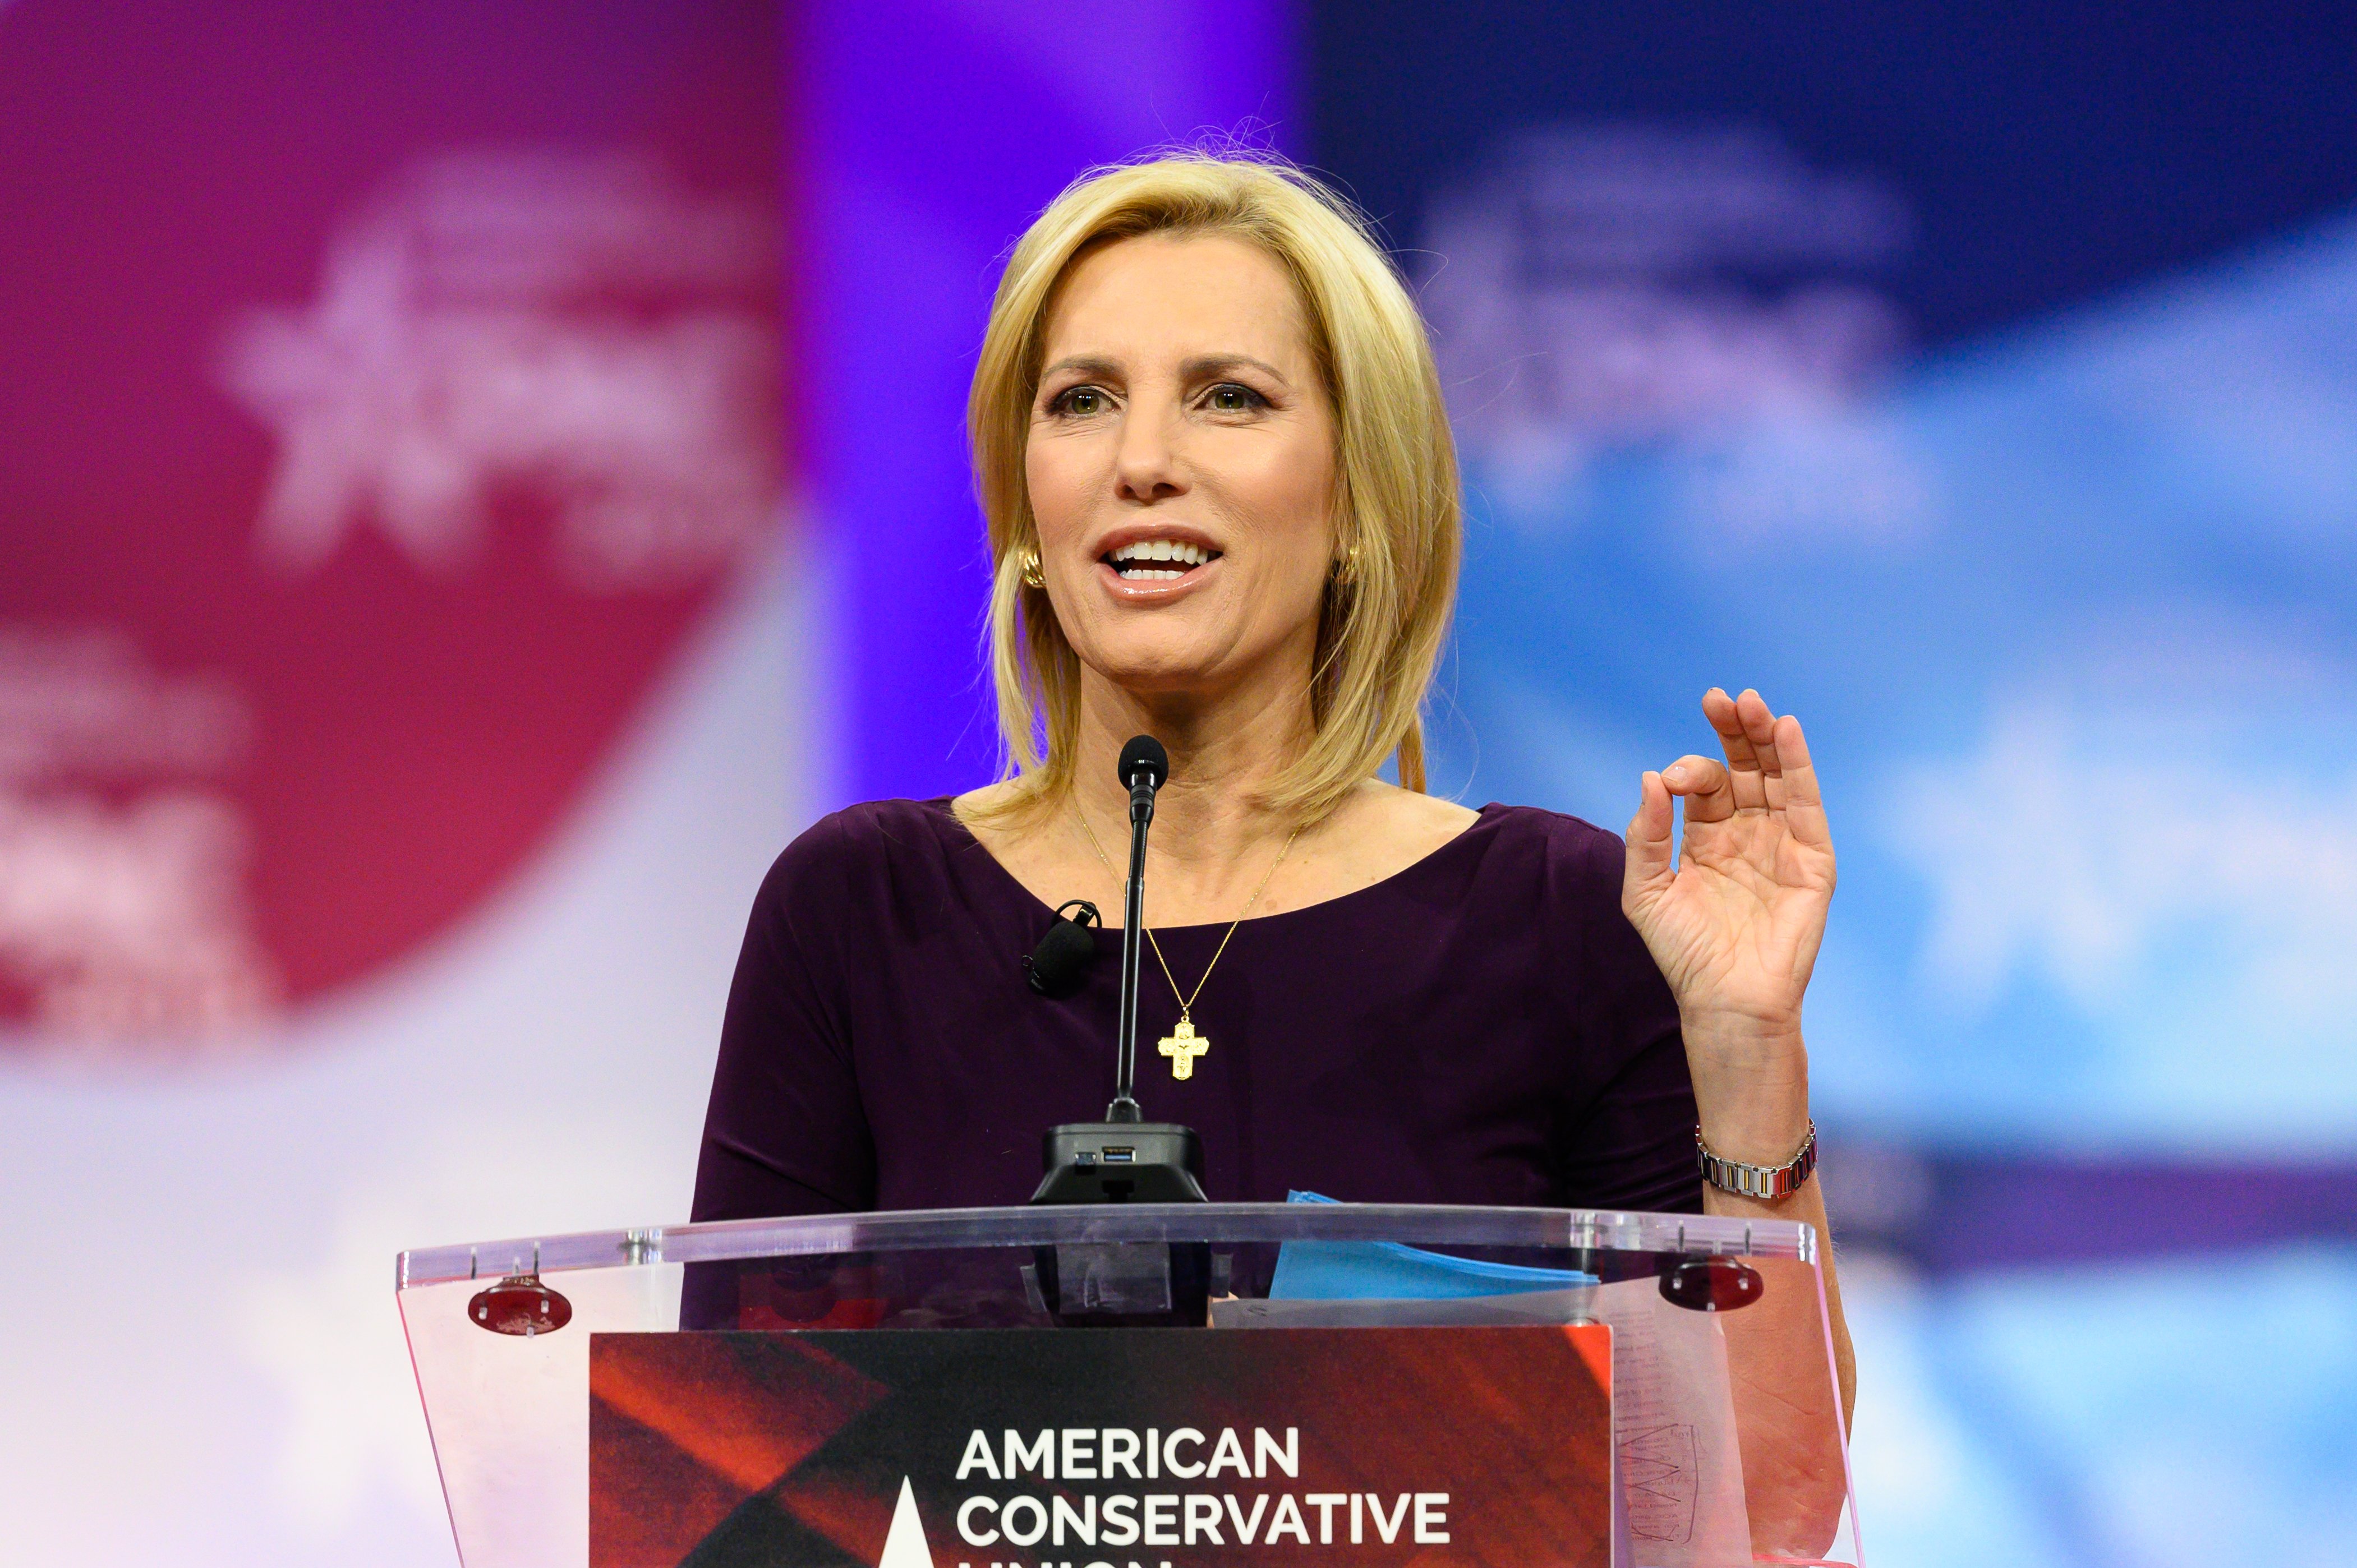 Laura Ingraham speaking at the American Conservative Union's Conservative Political Action Conference on February 28, 2019. | Source: Getty Images 